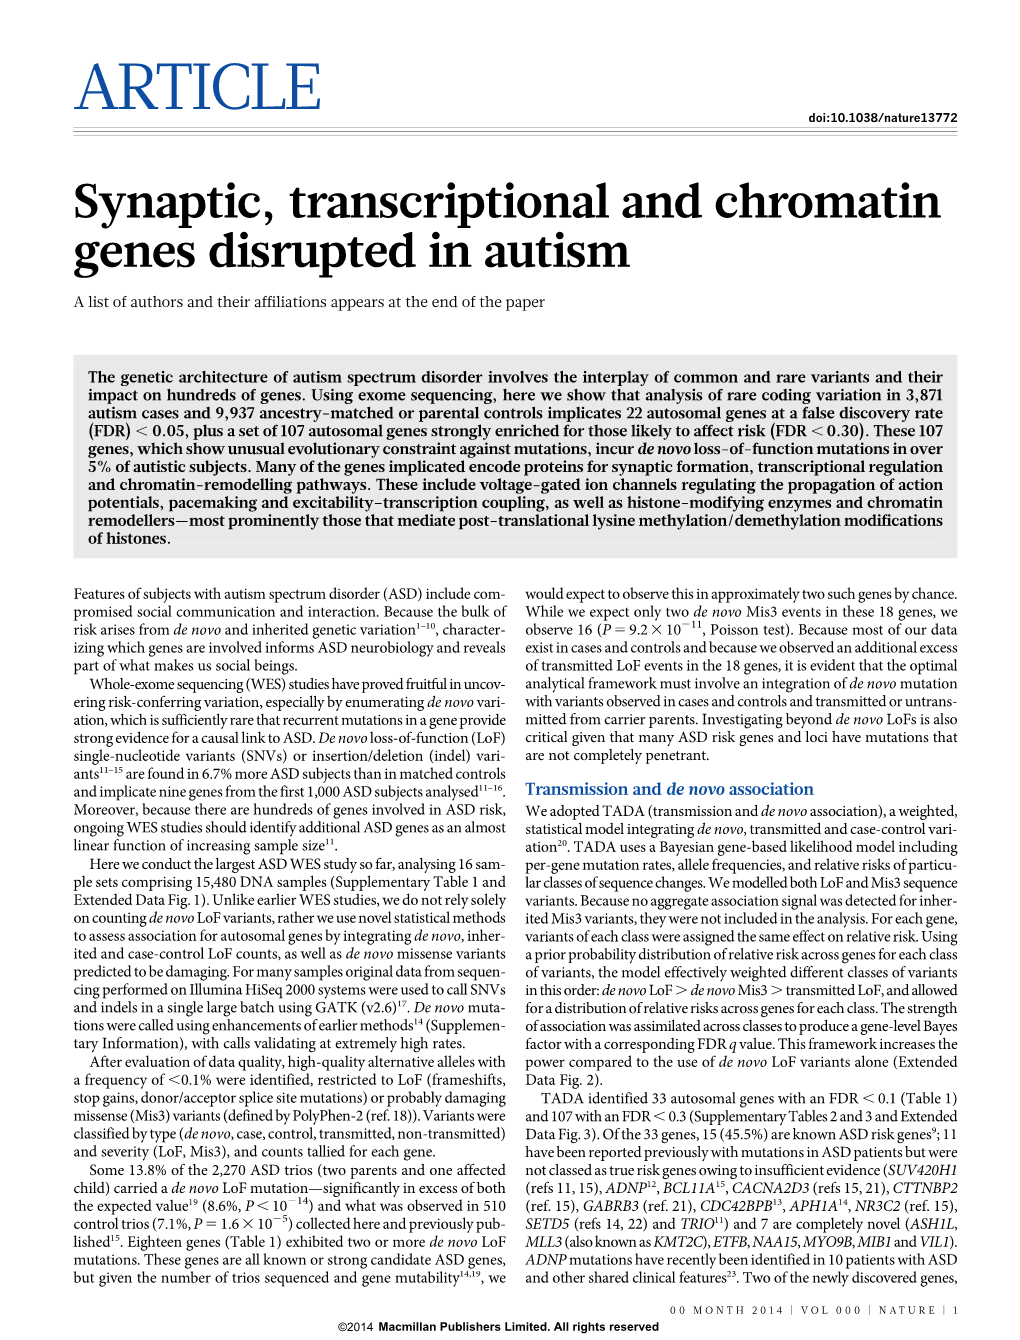 Synaptic, Transcriptional and Chromatin Genes Disrupted in Autism